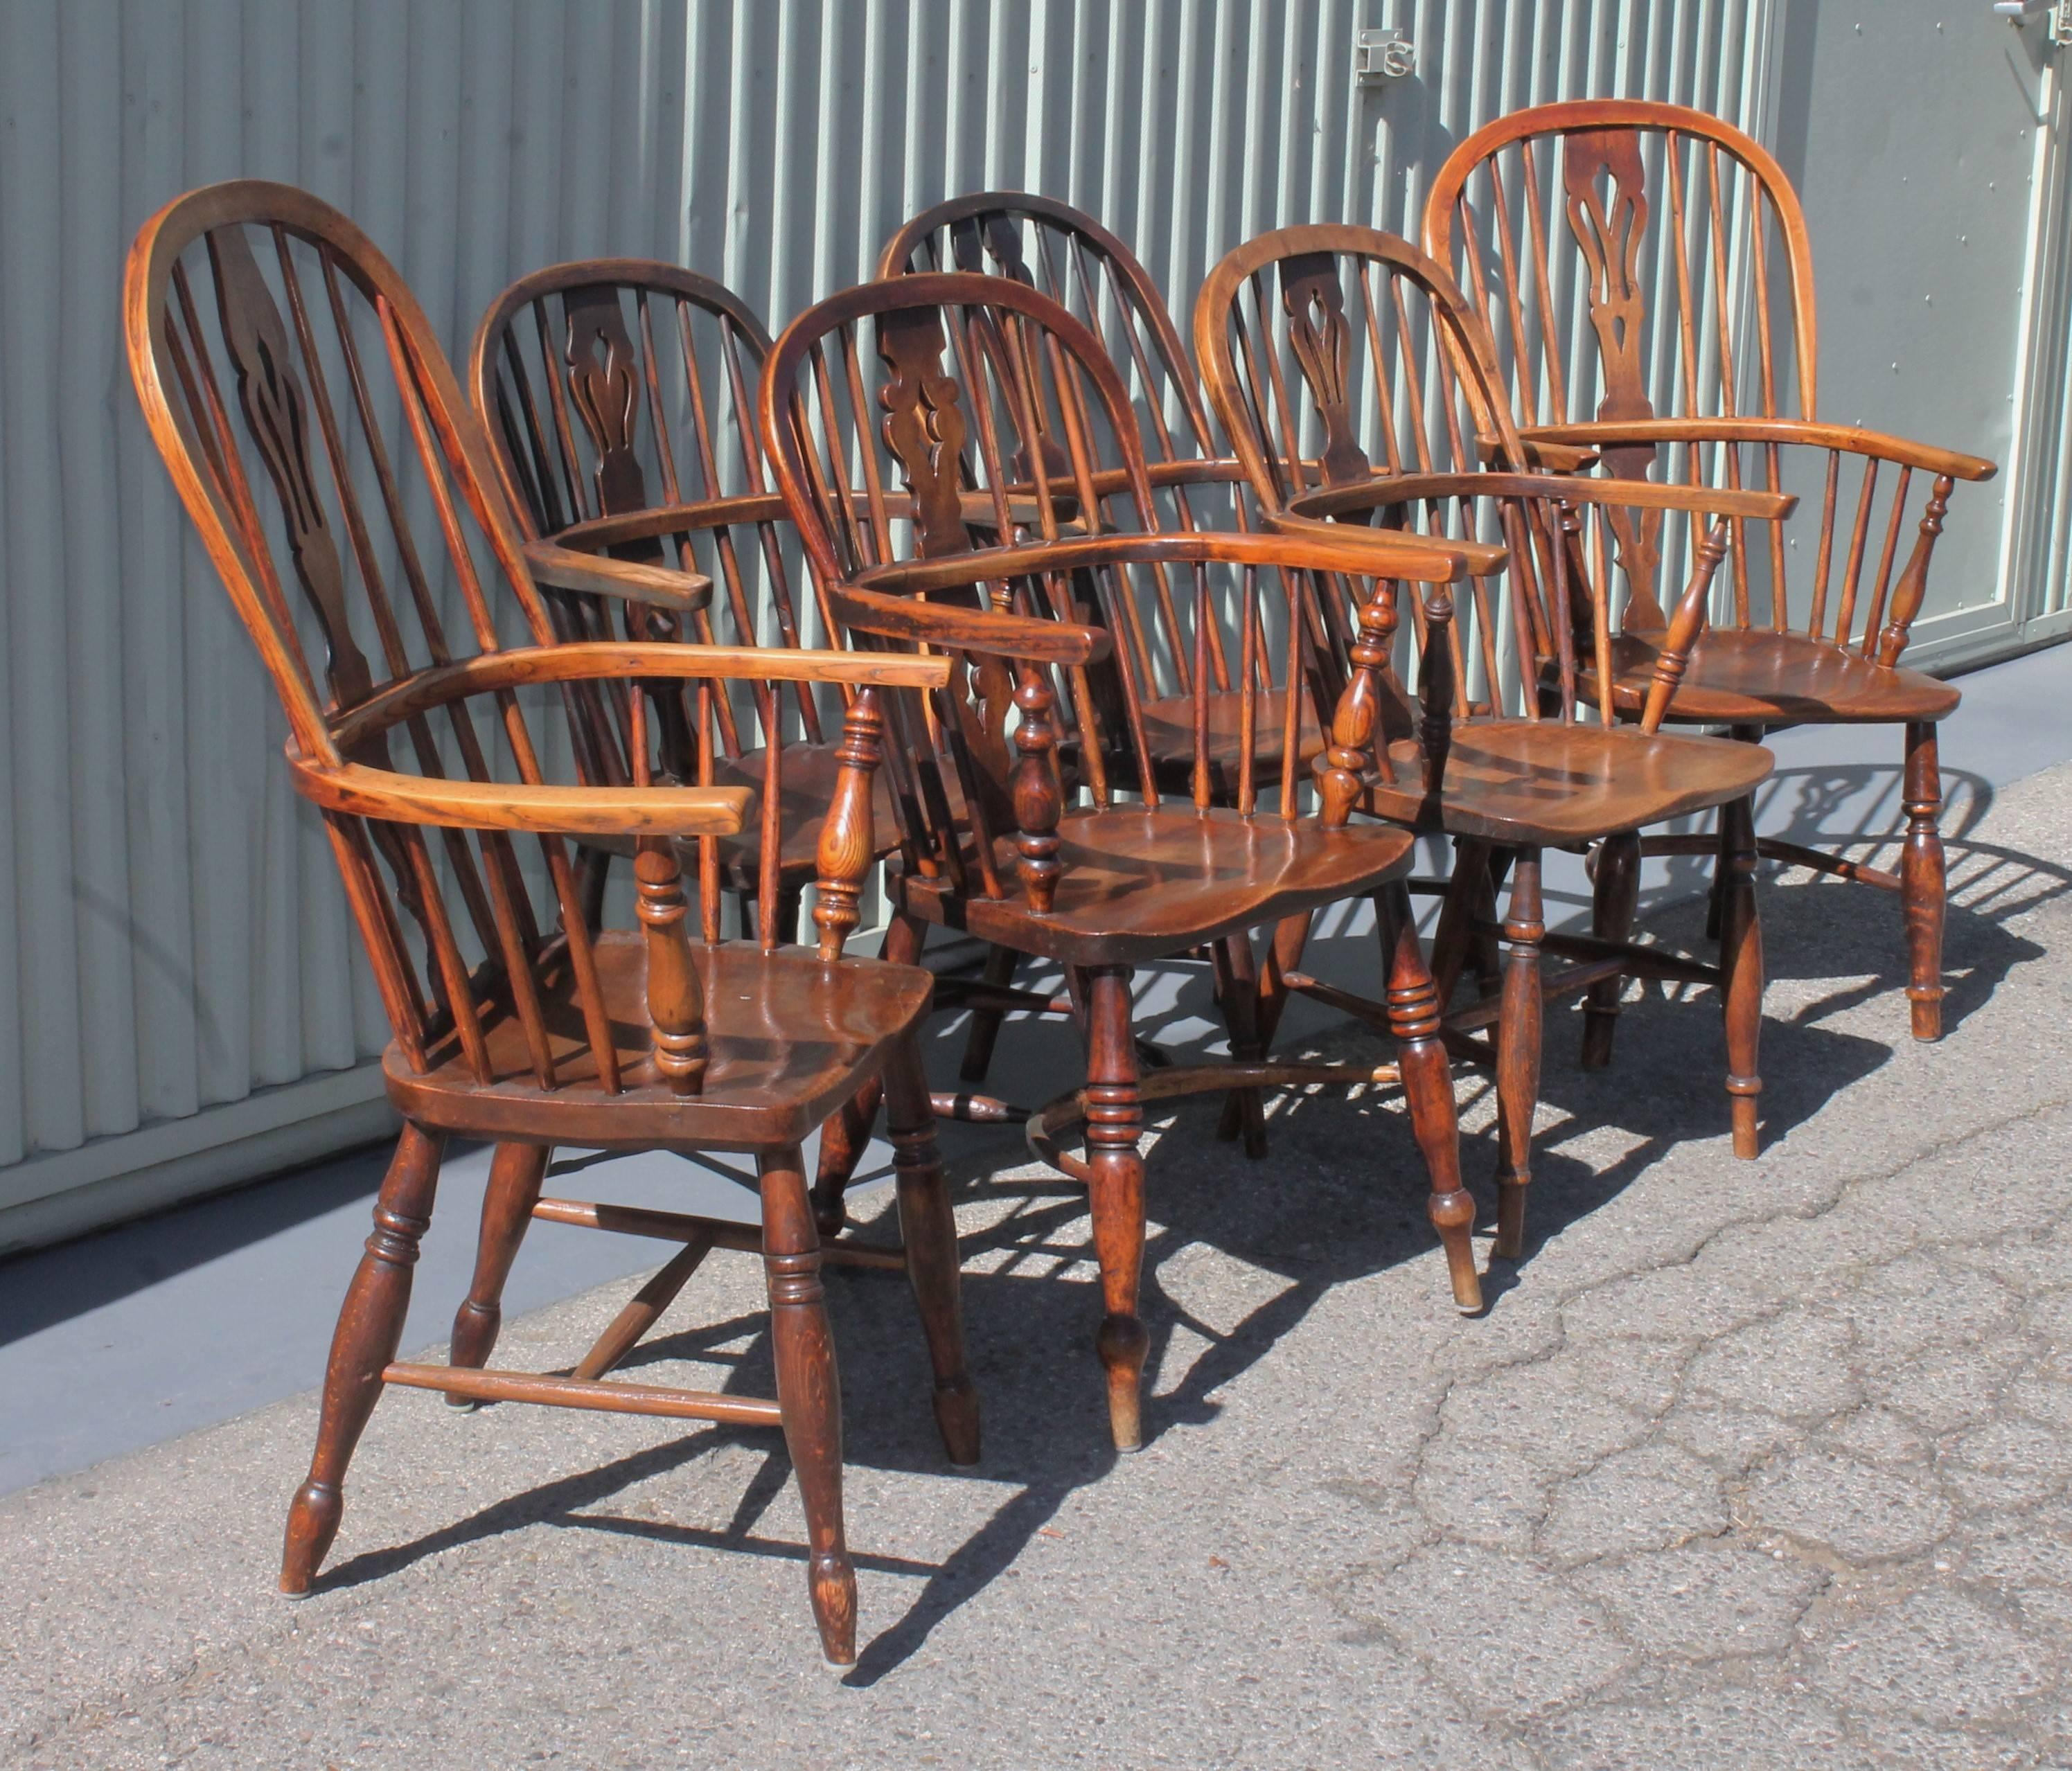 This set of unusual and wonderful aged, worn patina chairs are in good condition. The wear is in areas consistent with age and use. Some have different spindles or shapes. They look fantastic together as a set. The two high back chairs are 42"